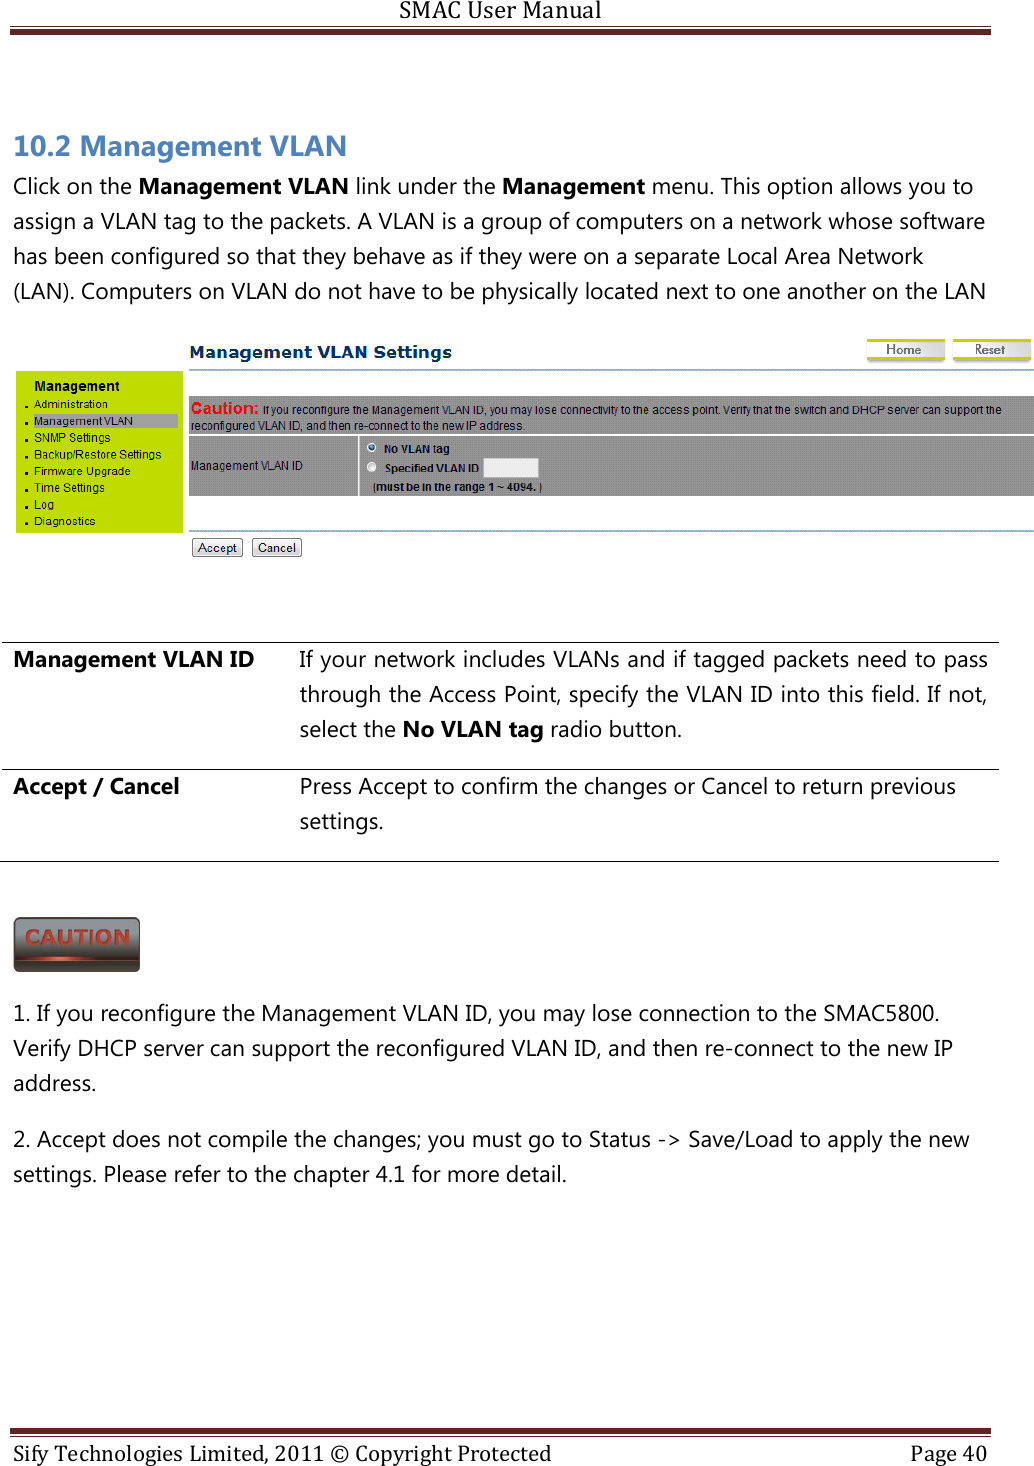 SMAC User Manual  Sify Technologies Limited, 2011 © Copyright Protected  Page 40   10.2 Management VLAN Click on the Management VLAN link under the Management menu. This option allows you to assign a VLAN tag to the packets. A VLAN is a group of computers on a network whose software has been configured so that they behave as if they were on a separate Local Area Network (LAN). Computers on VLAN do not have to be physically located next to one another on the LAN   Management VLAN ID If your network includes VLANs and if tagged packets need to pass through the Access Point, specify the VLAN ID into this field. If not, select the No VLAN tag radio button.  Accept / Cancel Press Accept to confirm the changes or Cancel to return previous settings.   1. If you reconfigure the Management VLAN ID, you may lose connection to the SMAC5800. Verify DHCP server can support the reconfigured VLAN ID, and then re-connect to the new IP address. 2. Accept does not compile the changes; you must go to Status -&gt; Save/Load to apply the new settings. Please refer to the chapter 4.1 for more detail.    